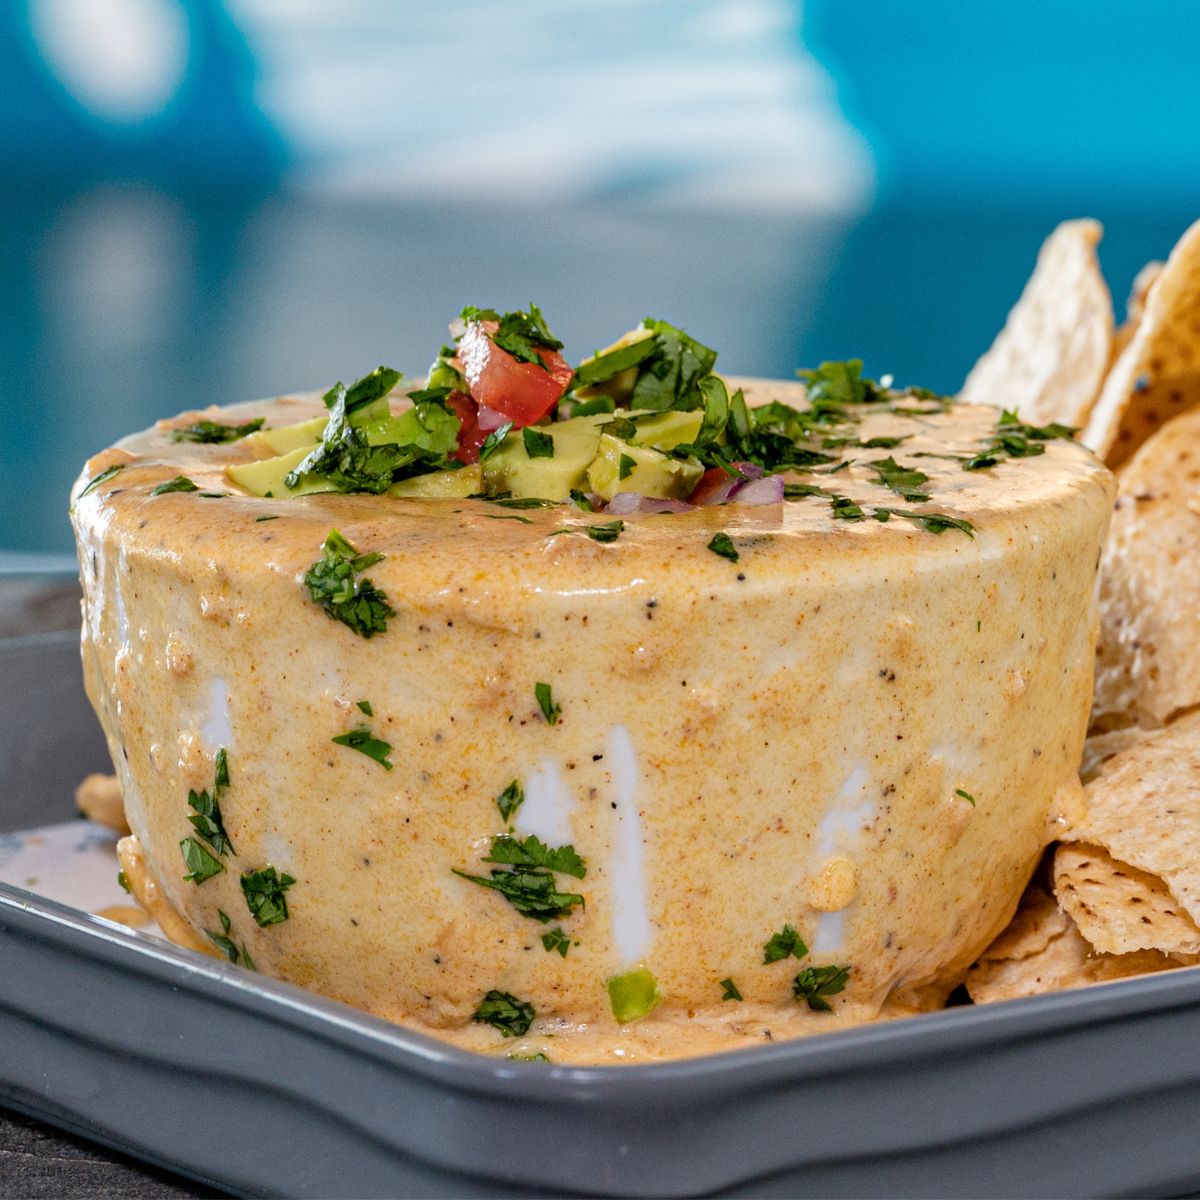 This is a queso in a bowl with tortilla chips in the background